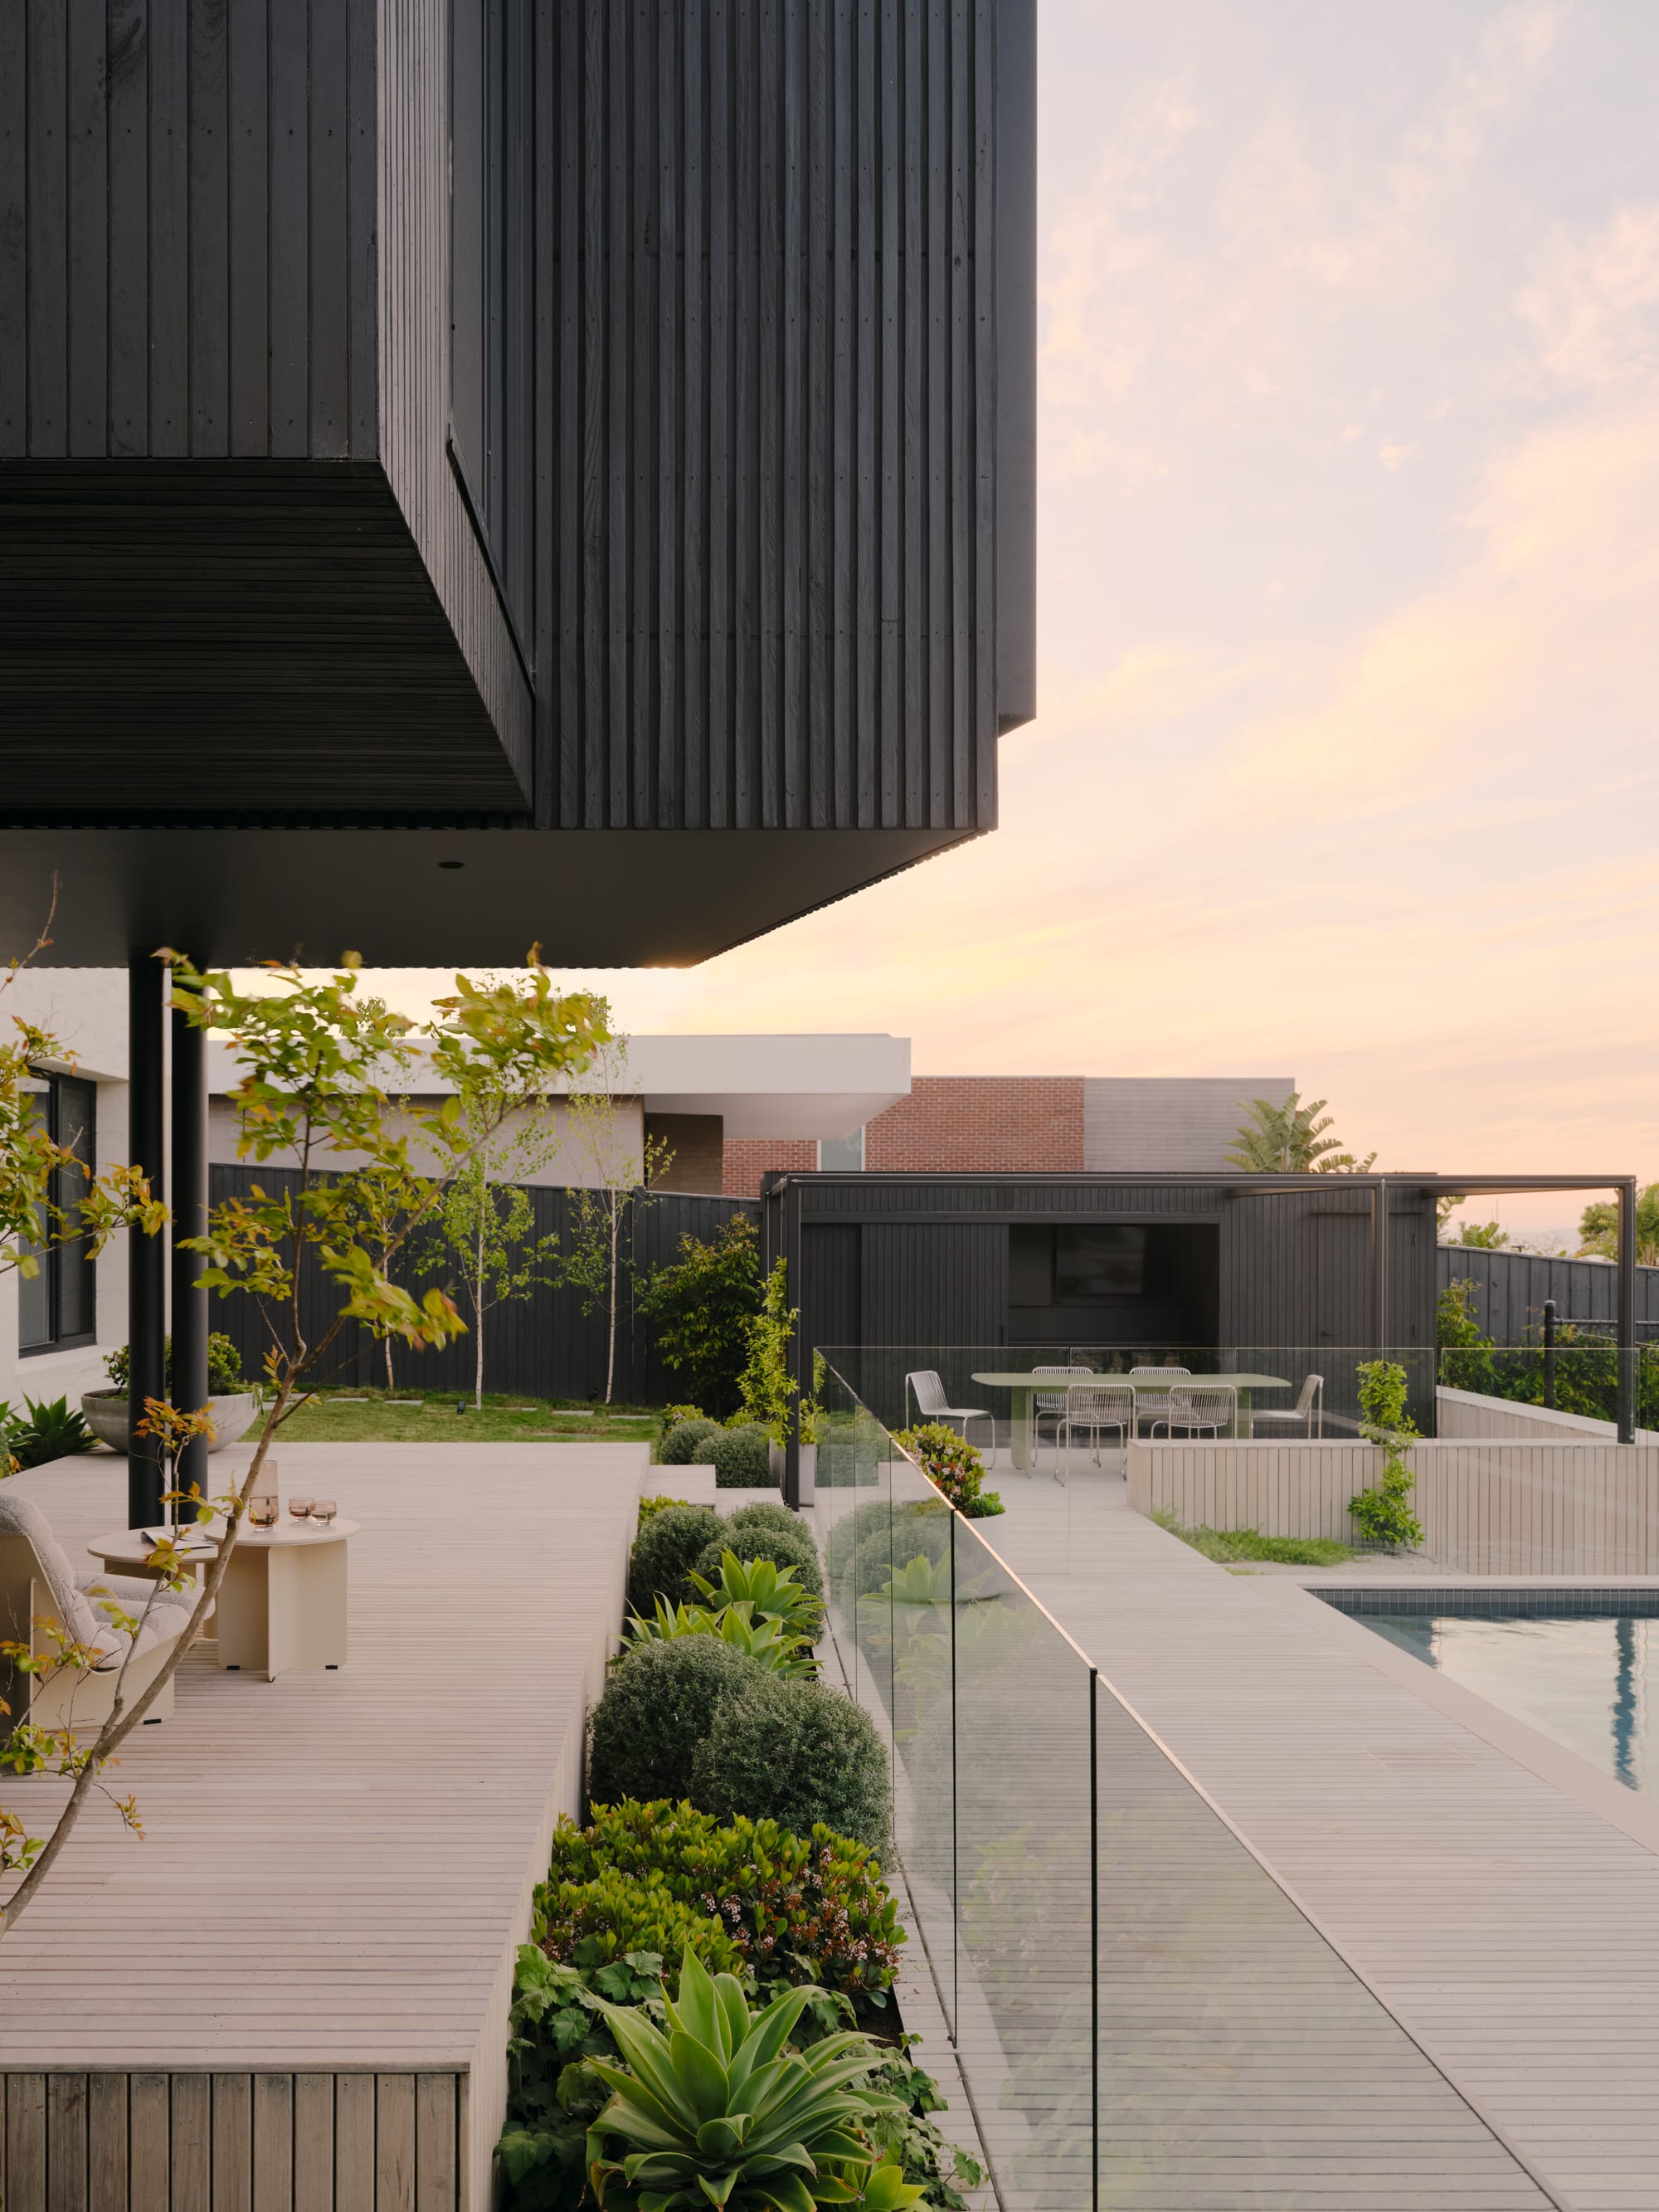 Courtside House by Tom Robertson Architects. Photography by Tom Ross. Exterior facade and gardens in elevation. Tiered decking leading to pool on right of image. Black pool house in right background. Grass and trees in left background if image. 